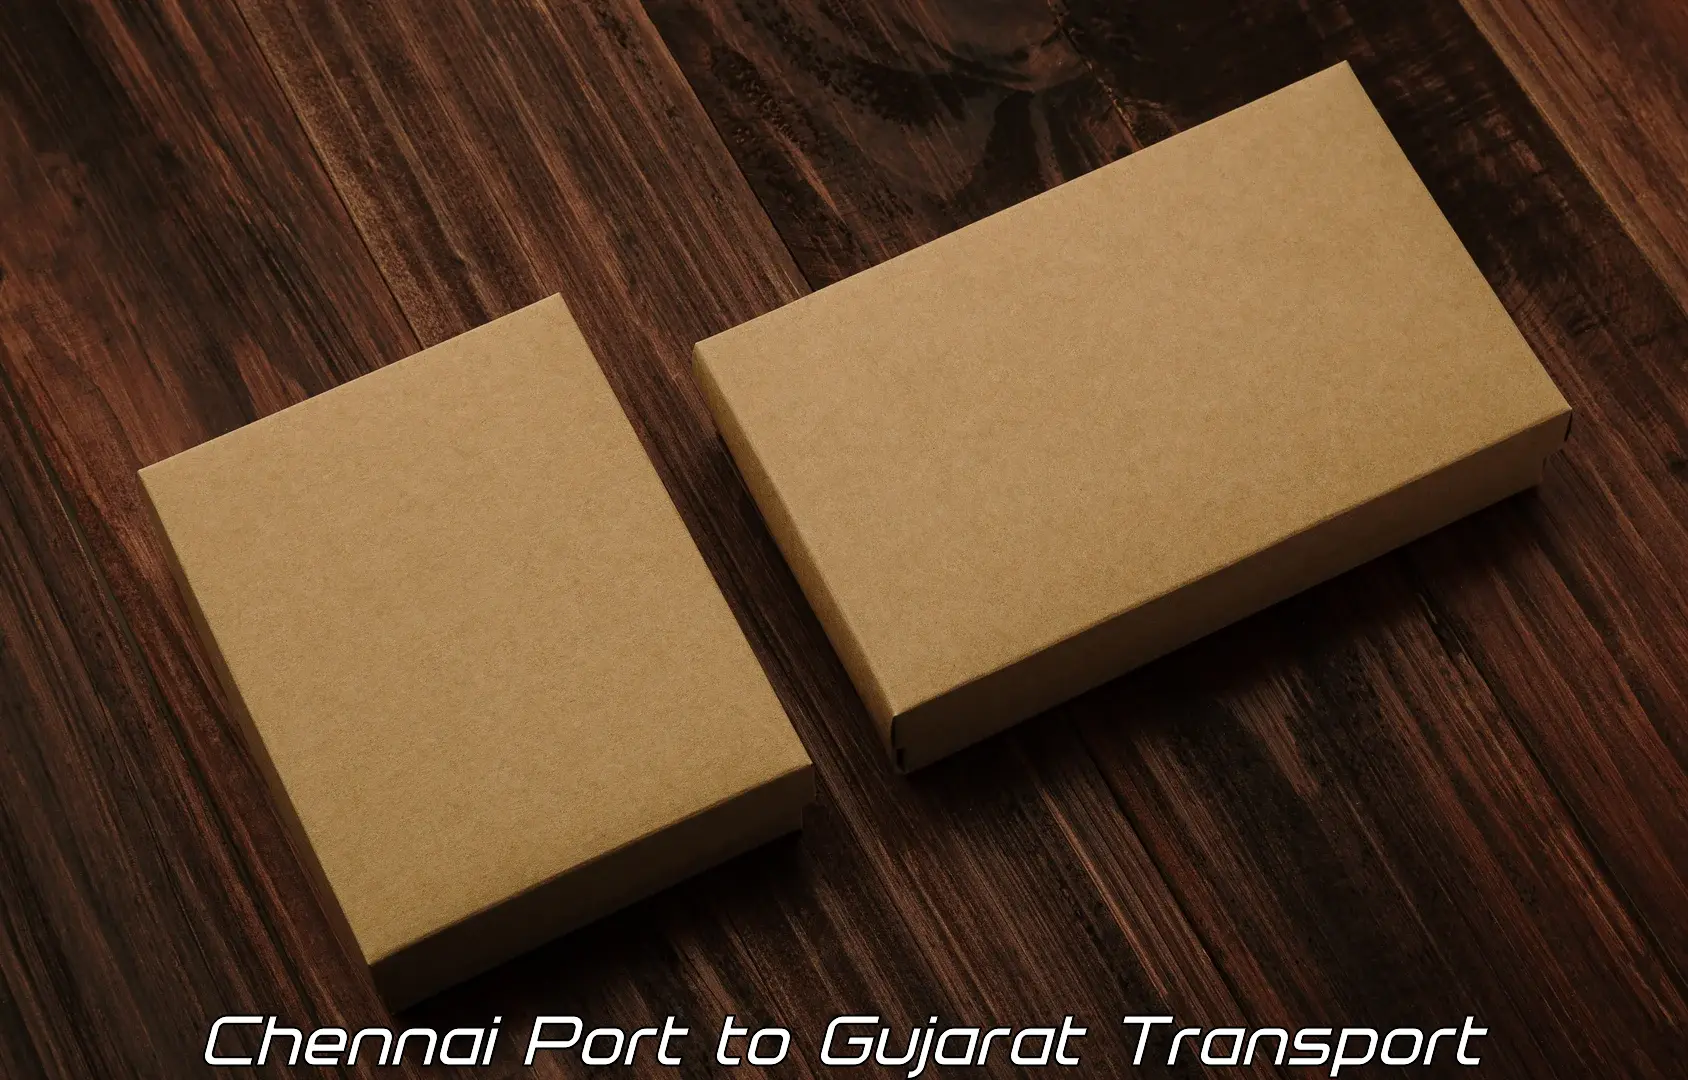 Transport bike from one state to another Chennai Port to Vatadara